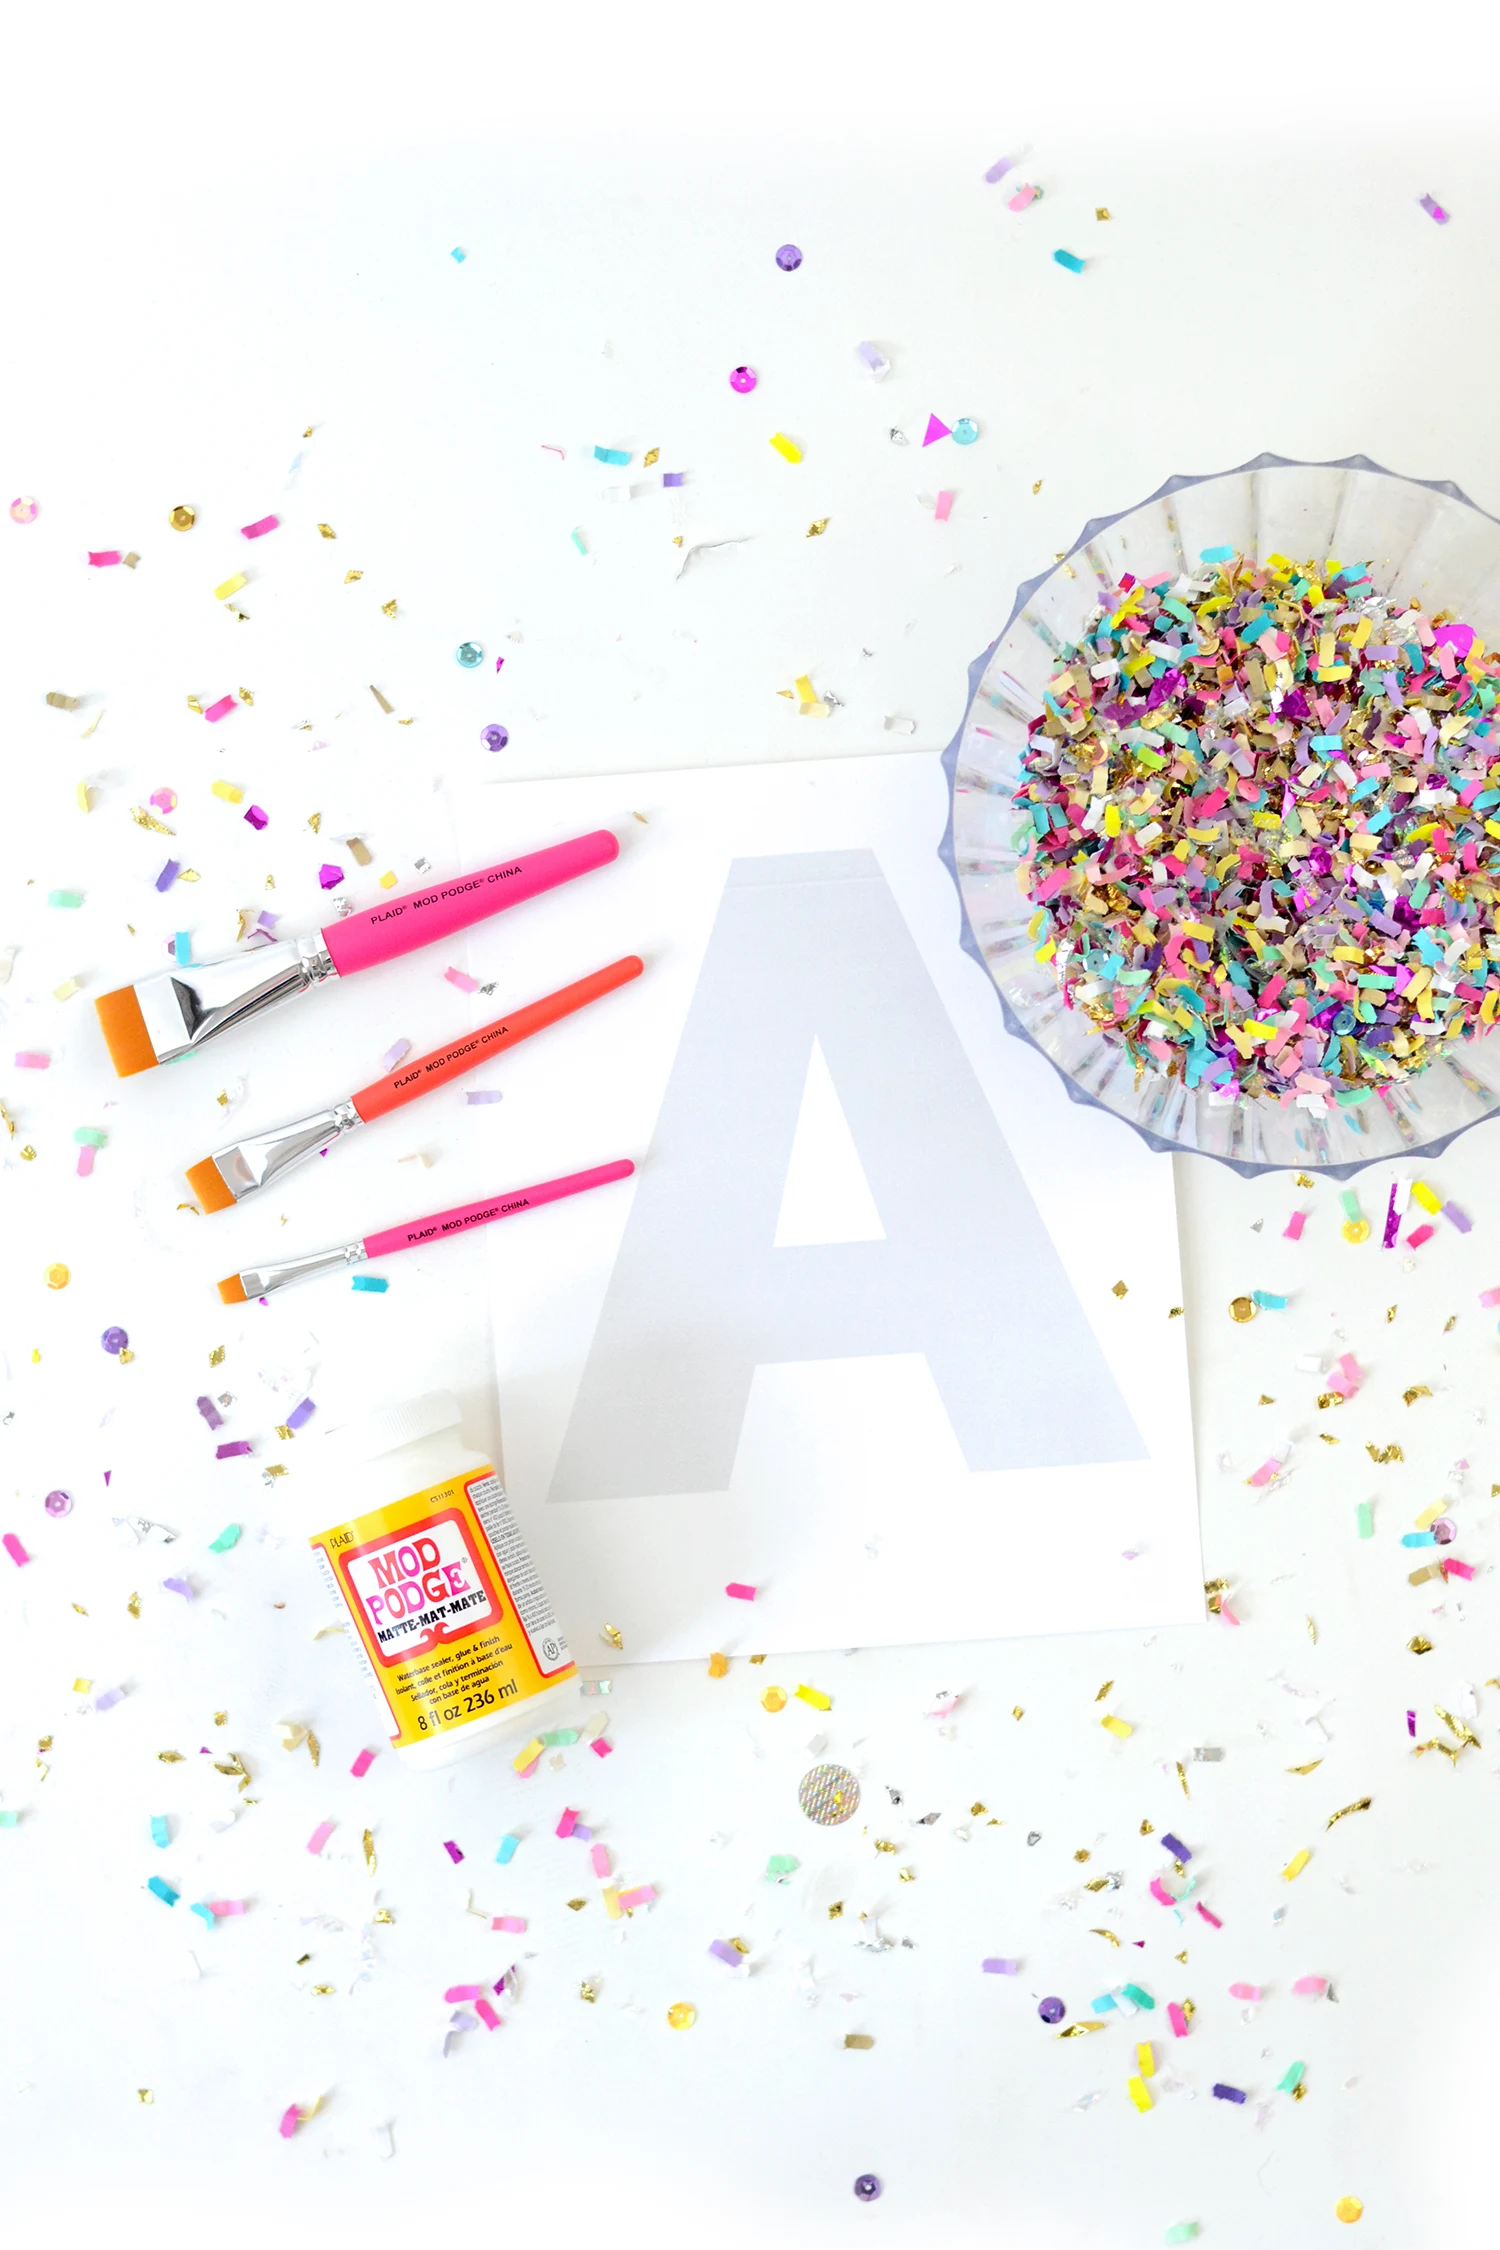 Paintbrushes, printed letters, and confetti